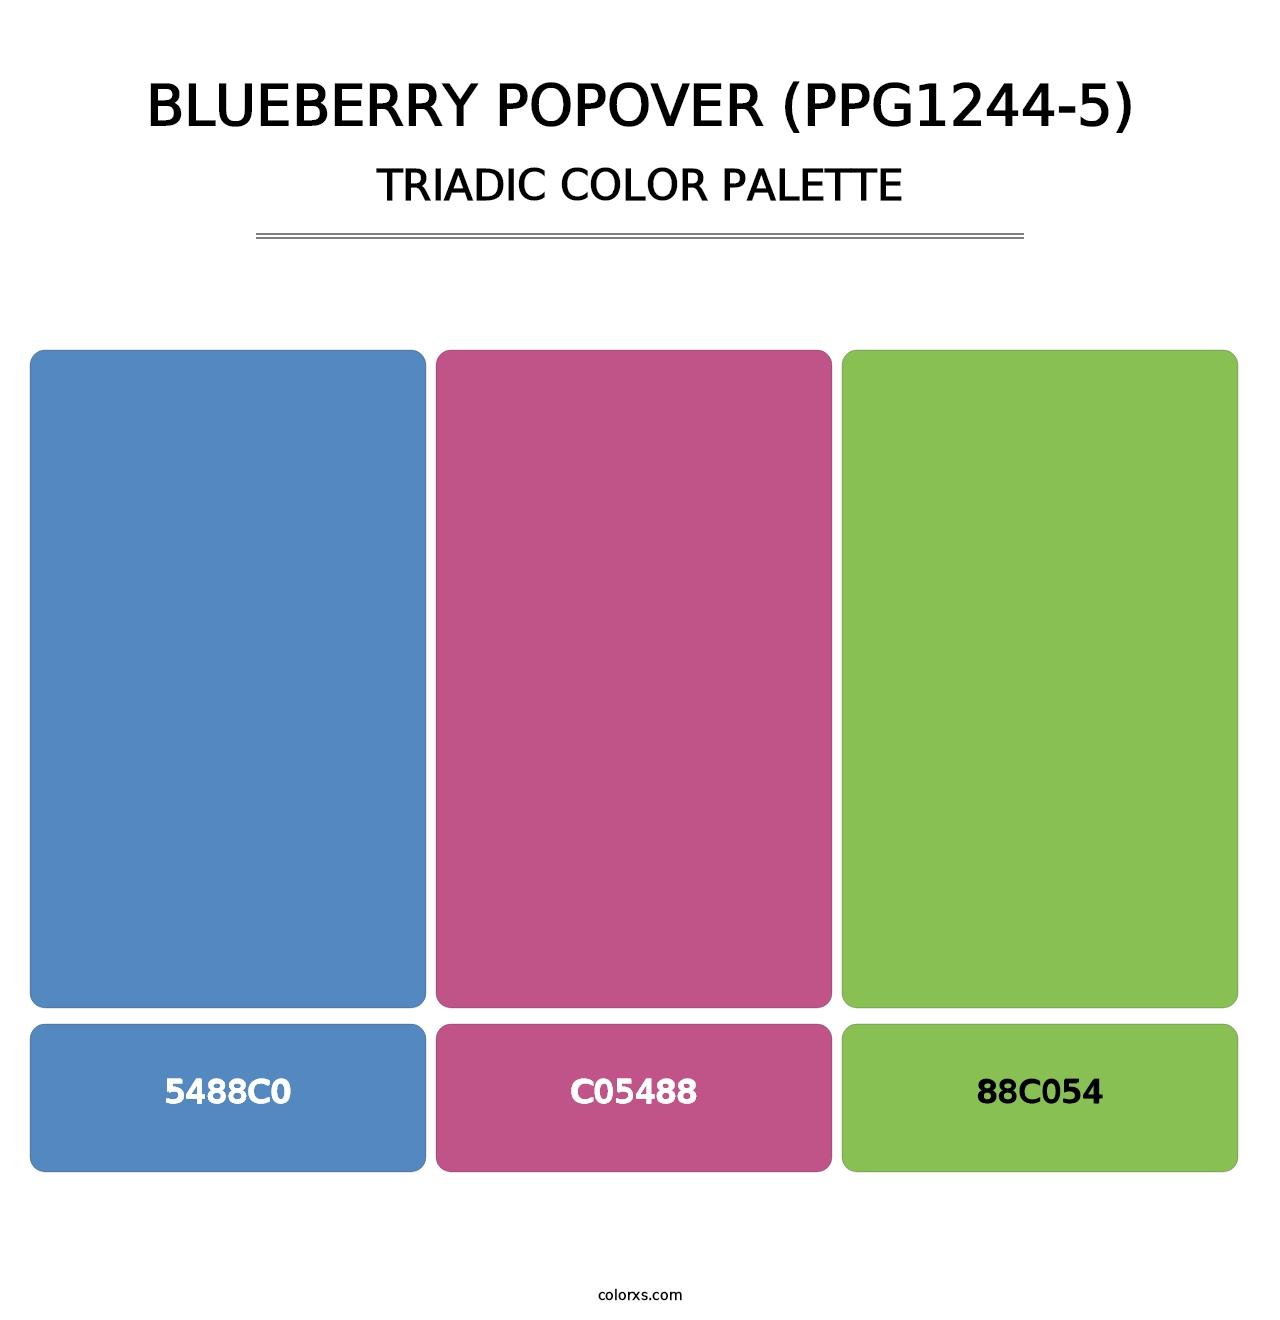 Blueberry Popover (PPG1244-5) - Triadic Color Palette